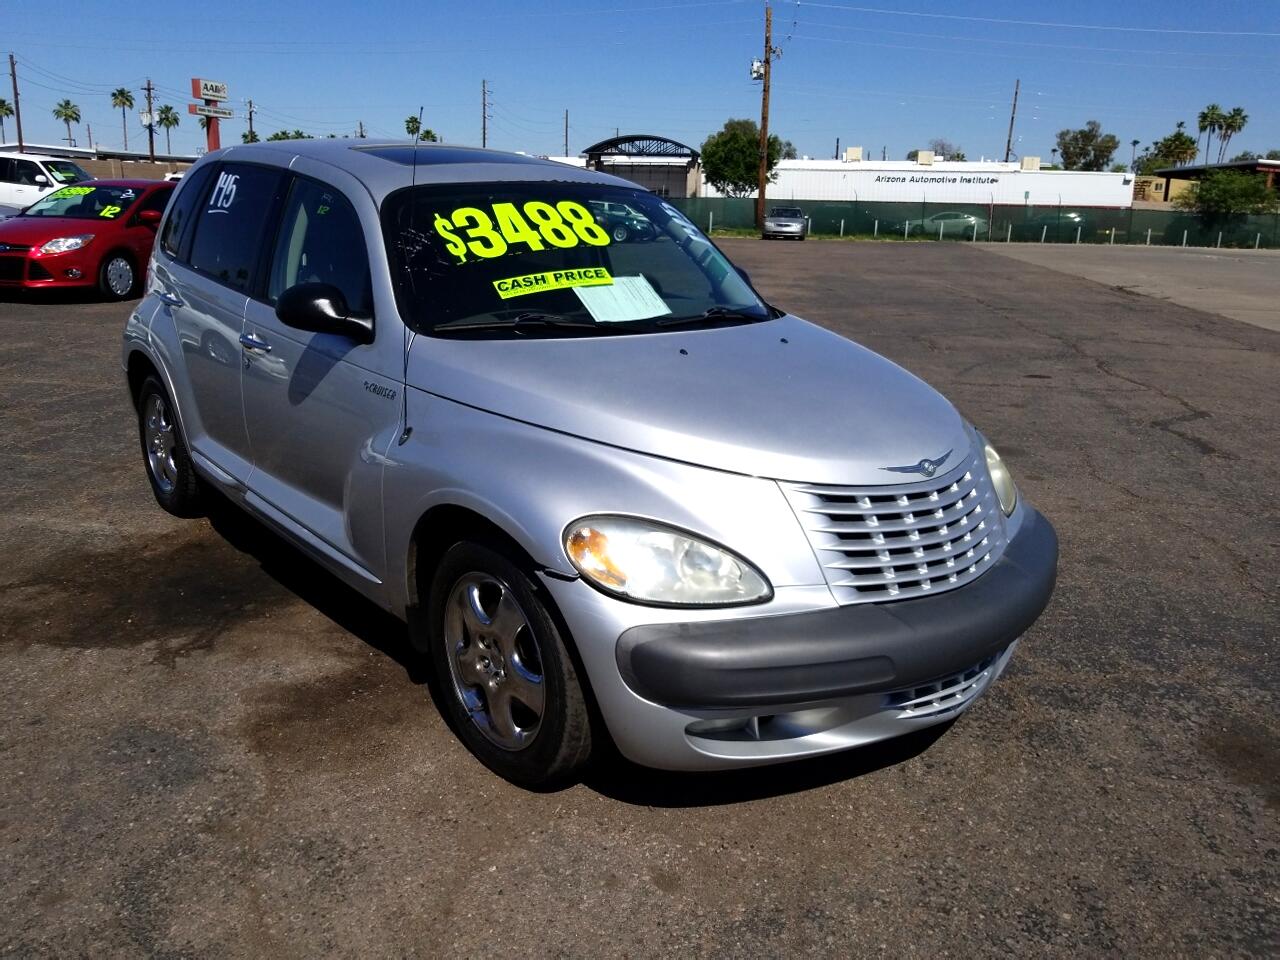 Used 2002 Chrysler PT Cruiser Limited Edition for Sale in